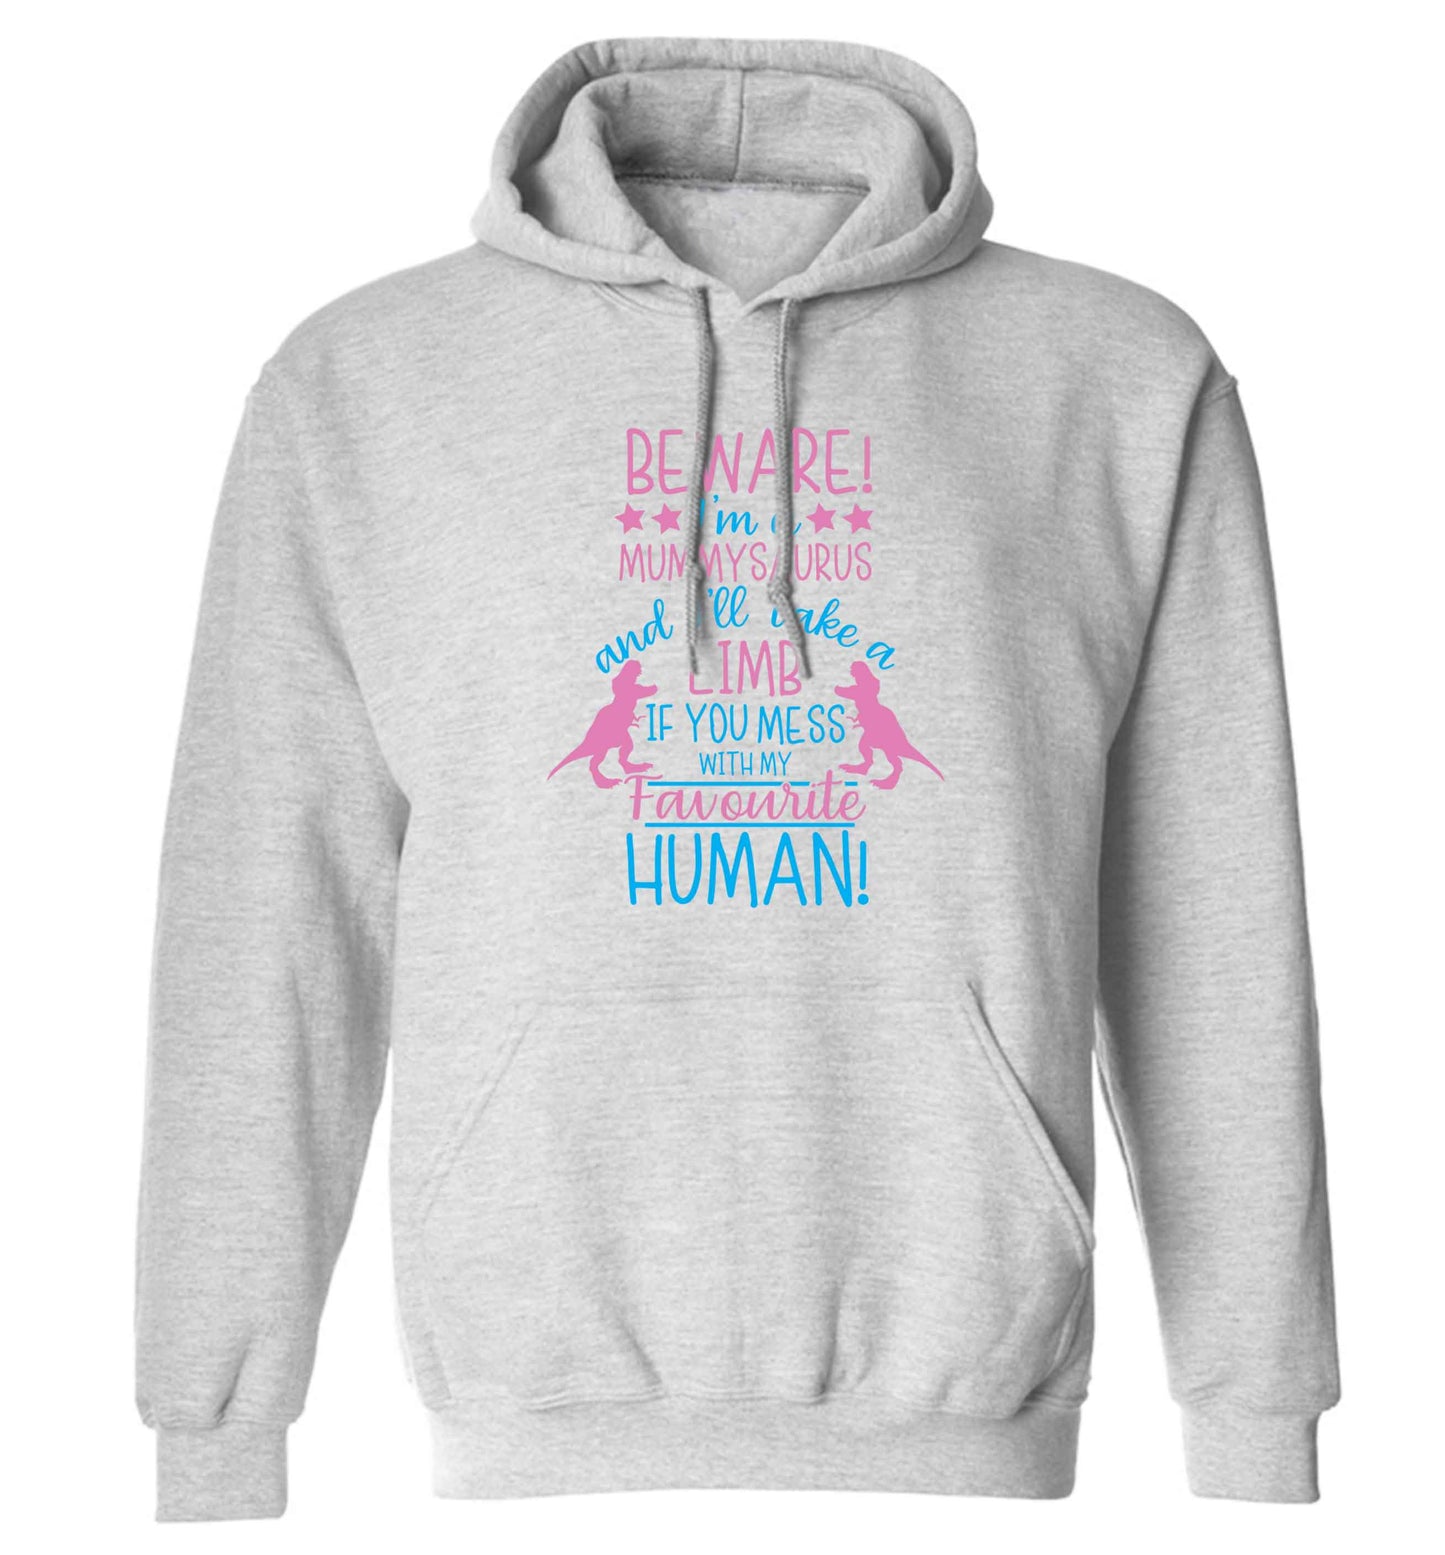 Perfect gift for any protective mummysaurus! Beware I'm a mummysaurus and I'll take a limb if you mess with my favourite human adults unisex grey hoodie 2XL